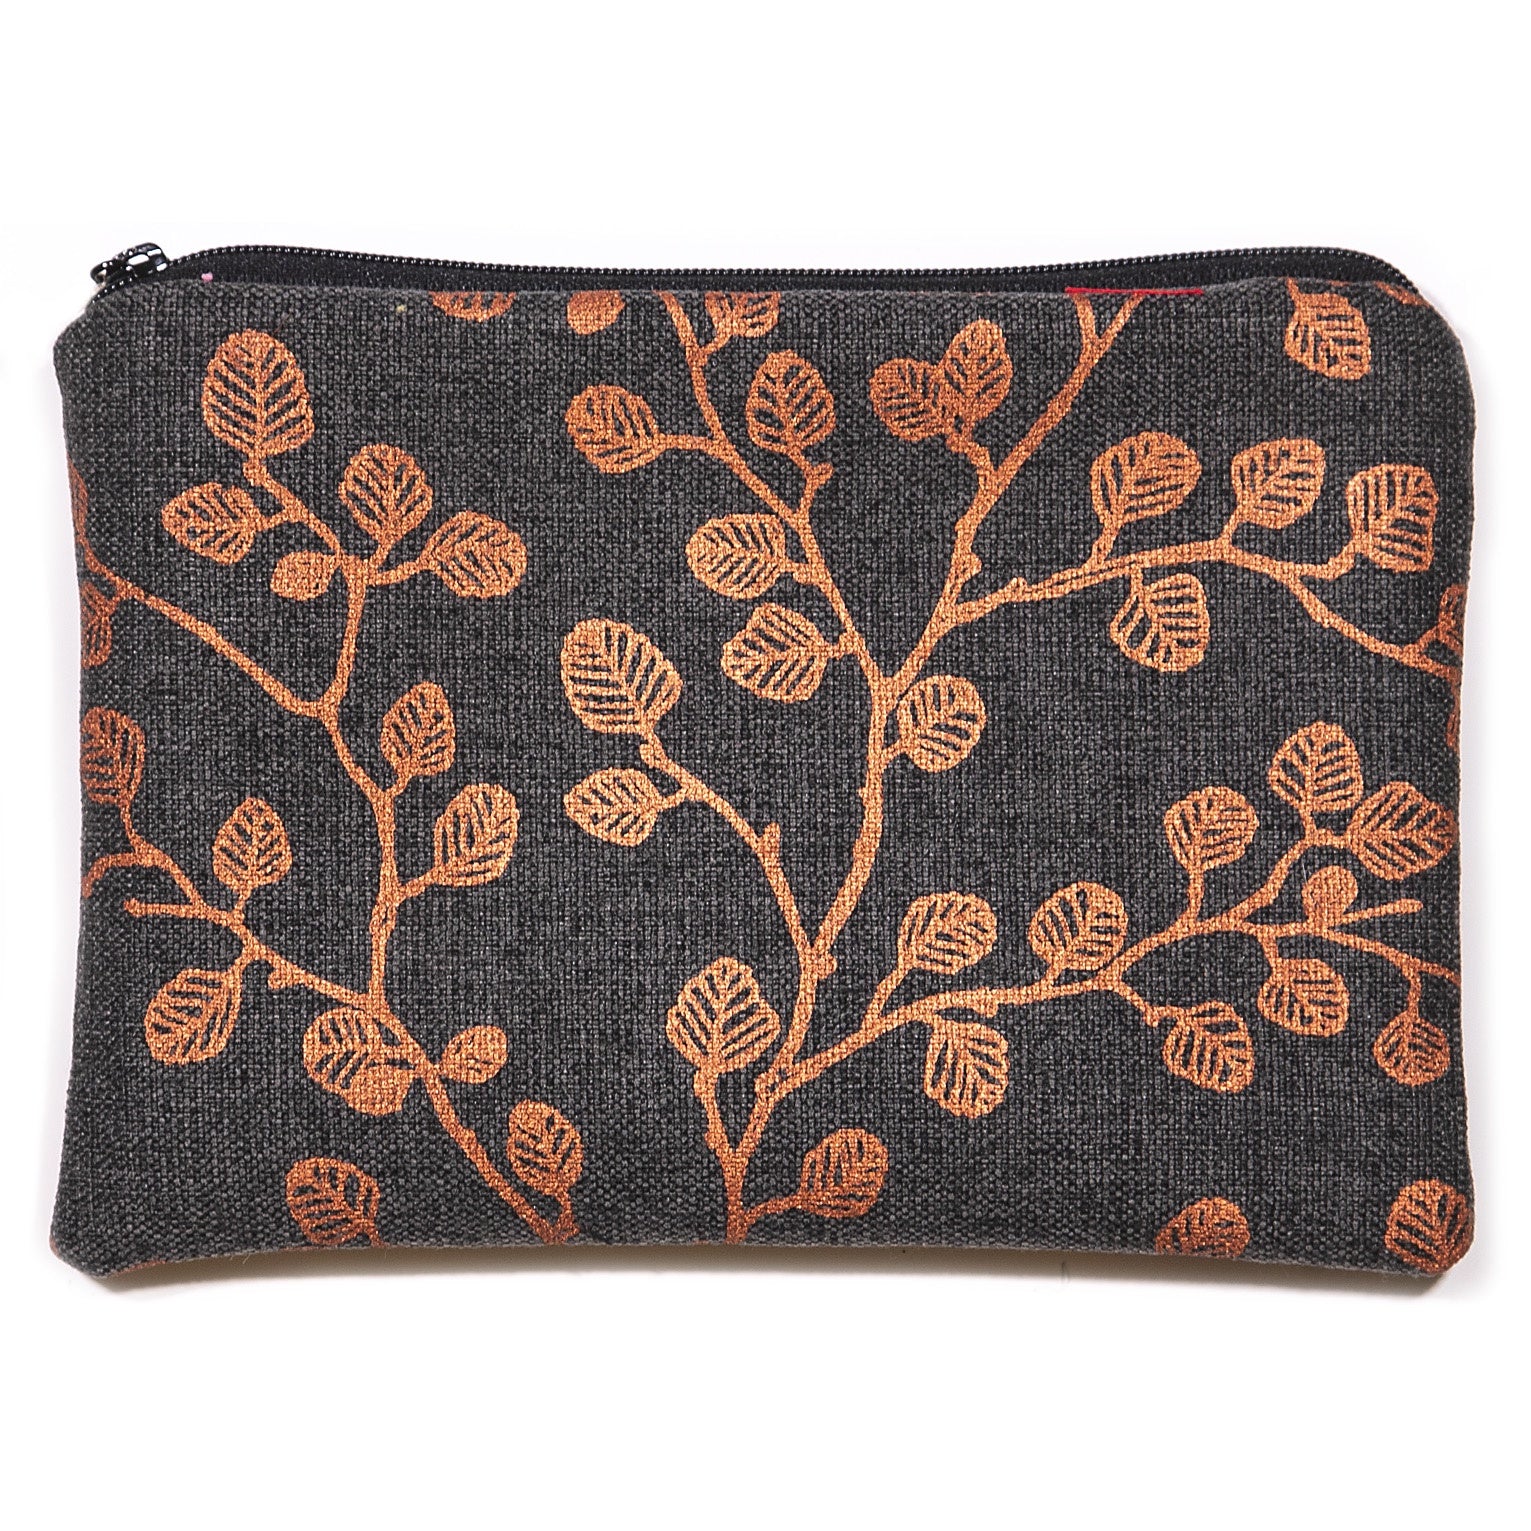 Stalley Textile Co - Zip Purse - Large - Fagus - Copper on Charcoal